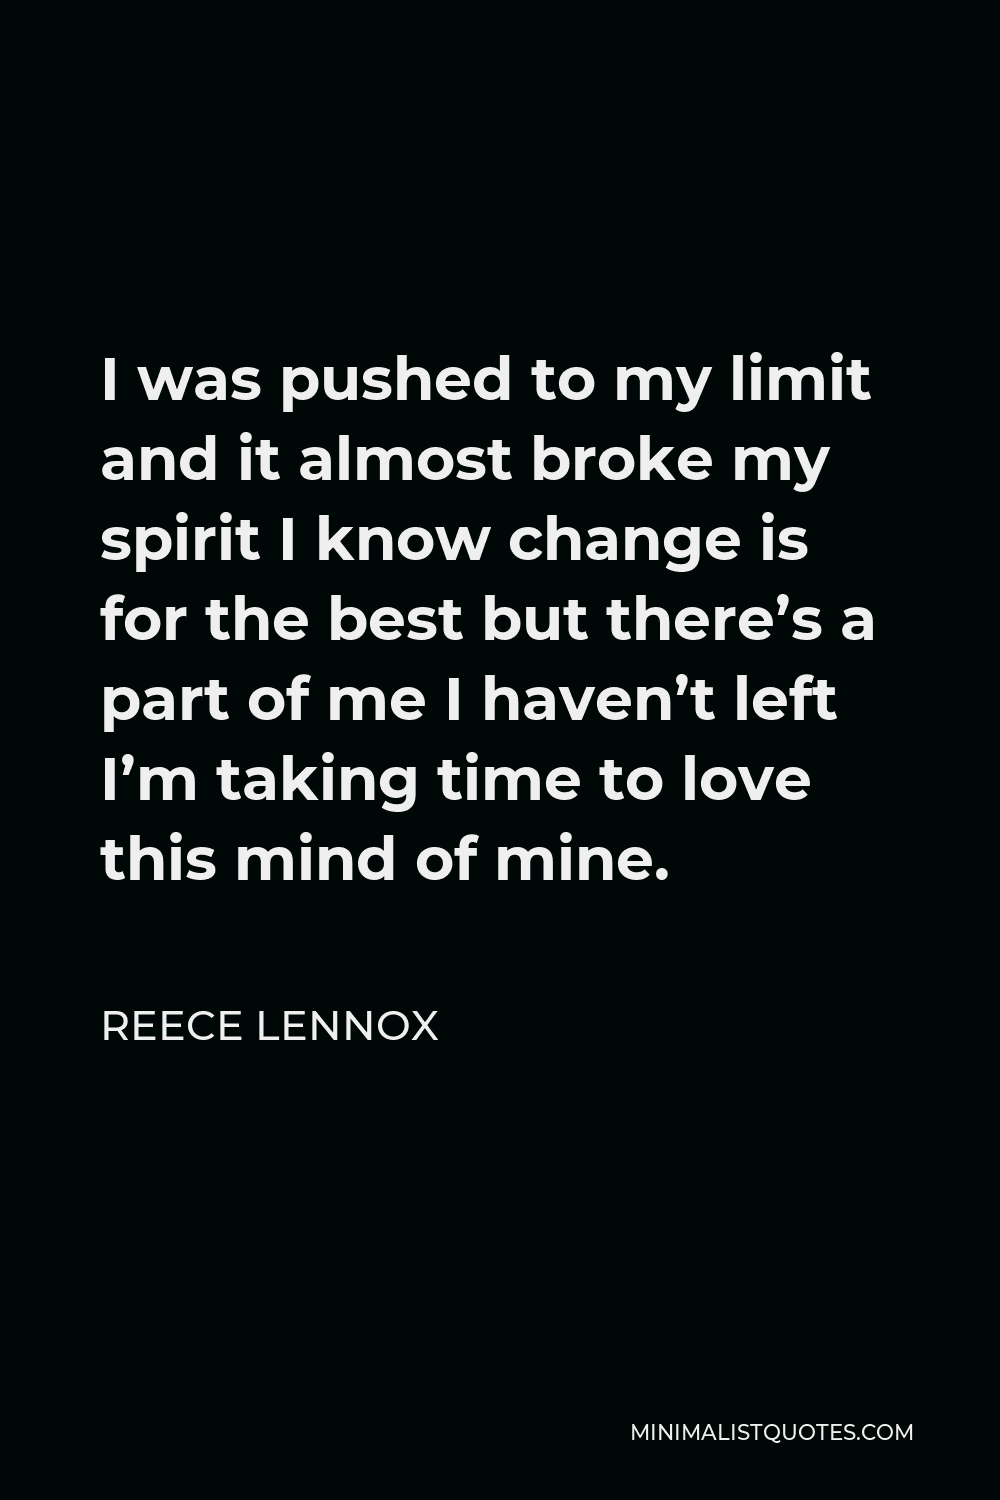 Reece Lennox Quote - I was pushed to my limit and it almost broke my spirit I know change is for the best but there’s a part of me I haven’t left I’m taking time to love this mind of mine.